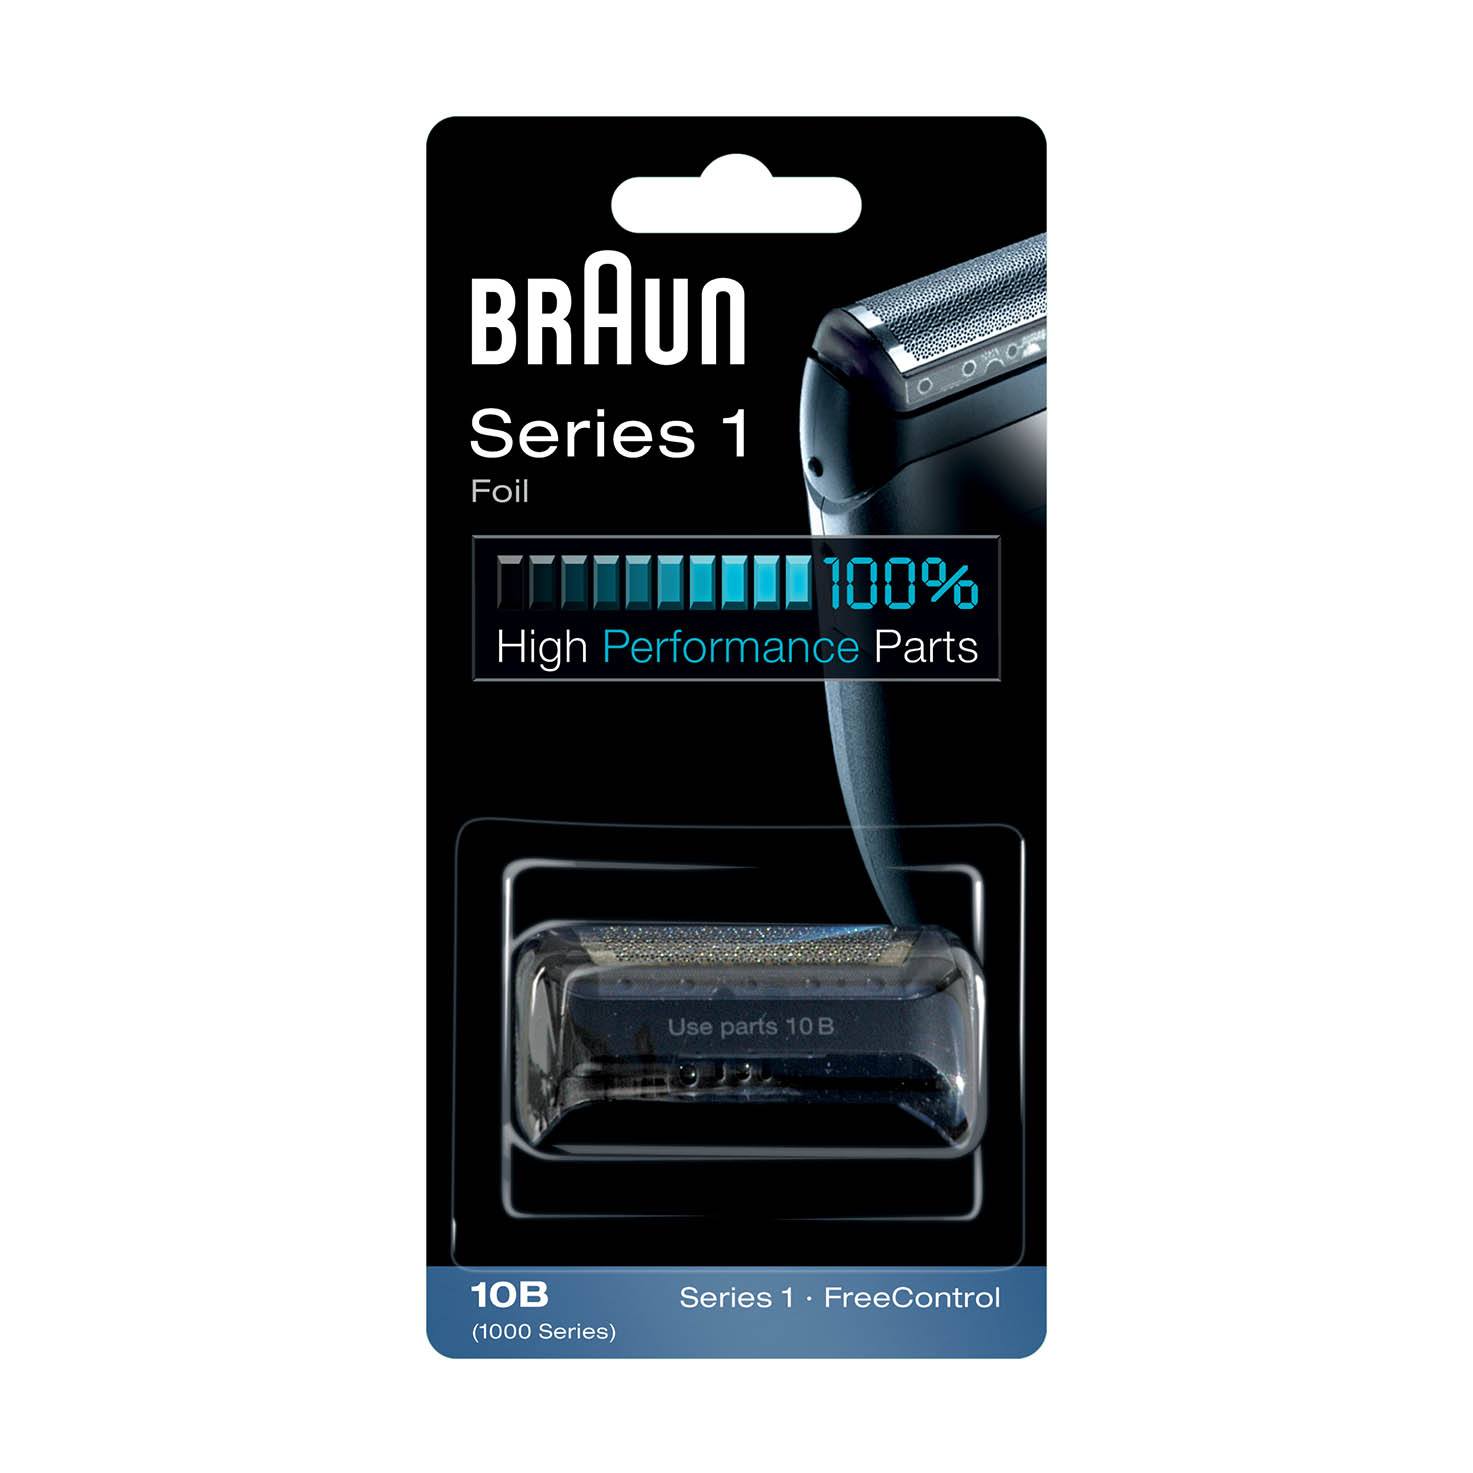  𝟮𝟬𝟮𝟯 𝙐𝙥𝙜𝙧𝙖𝙙𝙚𝙙 10B Replacement Foil & Cutter for  Compatible with Bra-un Cruzer, 10B/20B 1000/2000 Series Shaver Head Set  Replacement Part Compatible with 190 1735 1775 5728 5729 170S : Beauty &  Personal Care